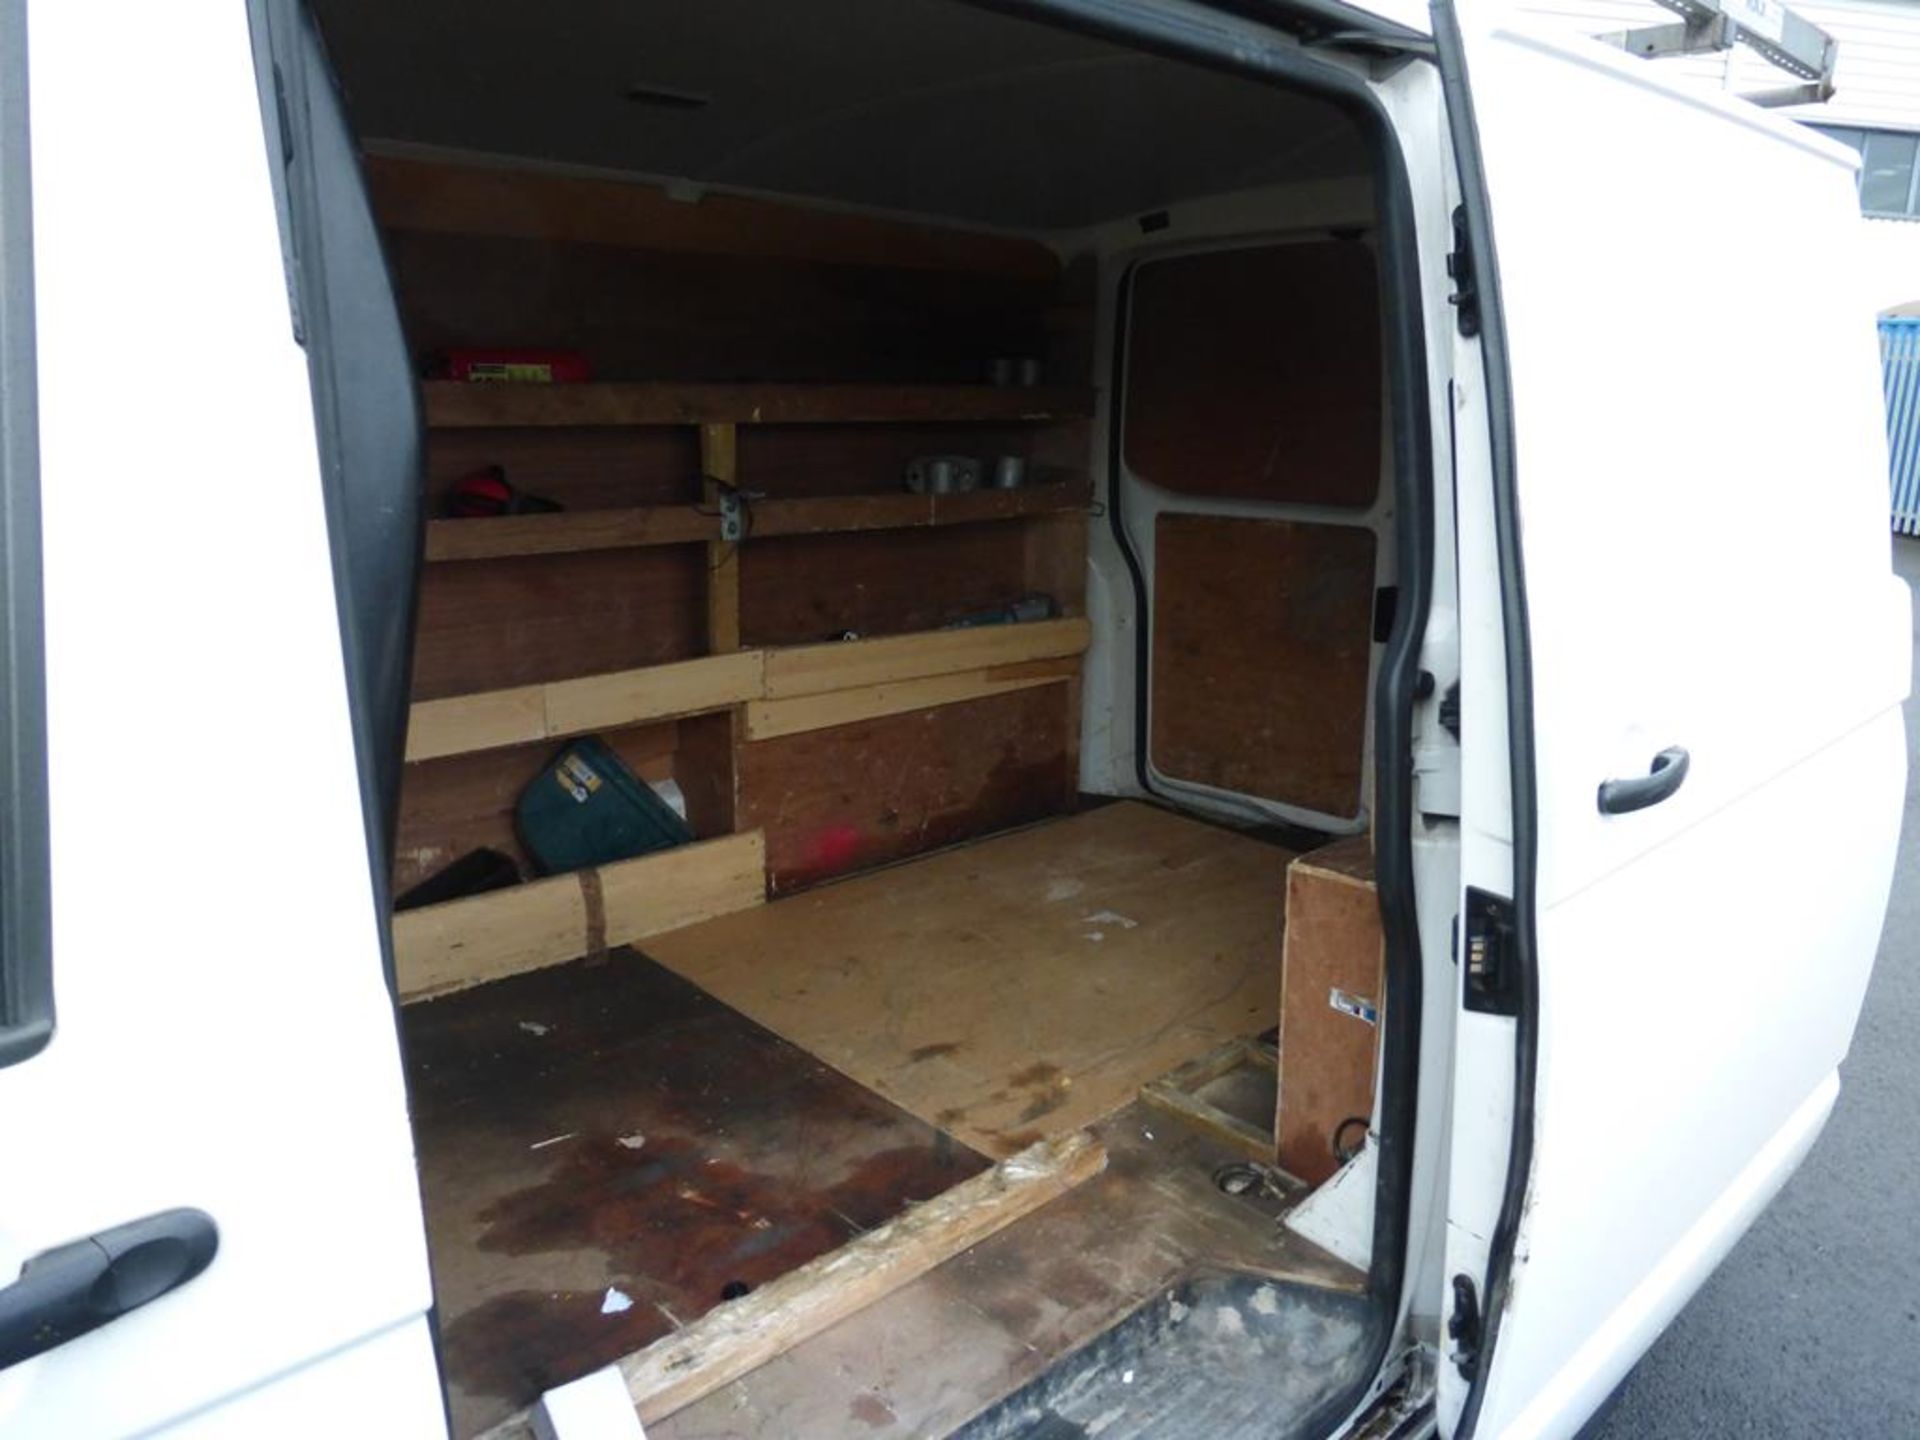 * 2011 Volkswagen Transporter 1968cc Diesel. Revenue Weight 2800Kg, fitted with Roof Rack. - Image 15 of 19